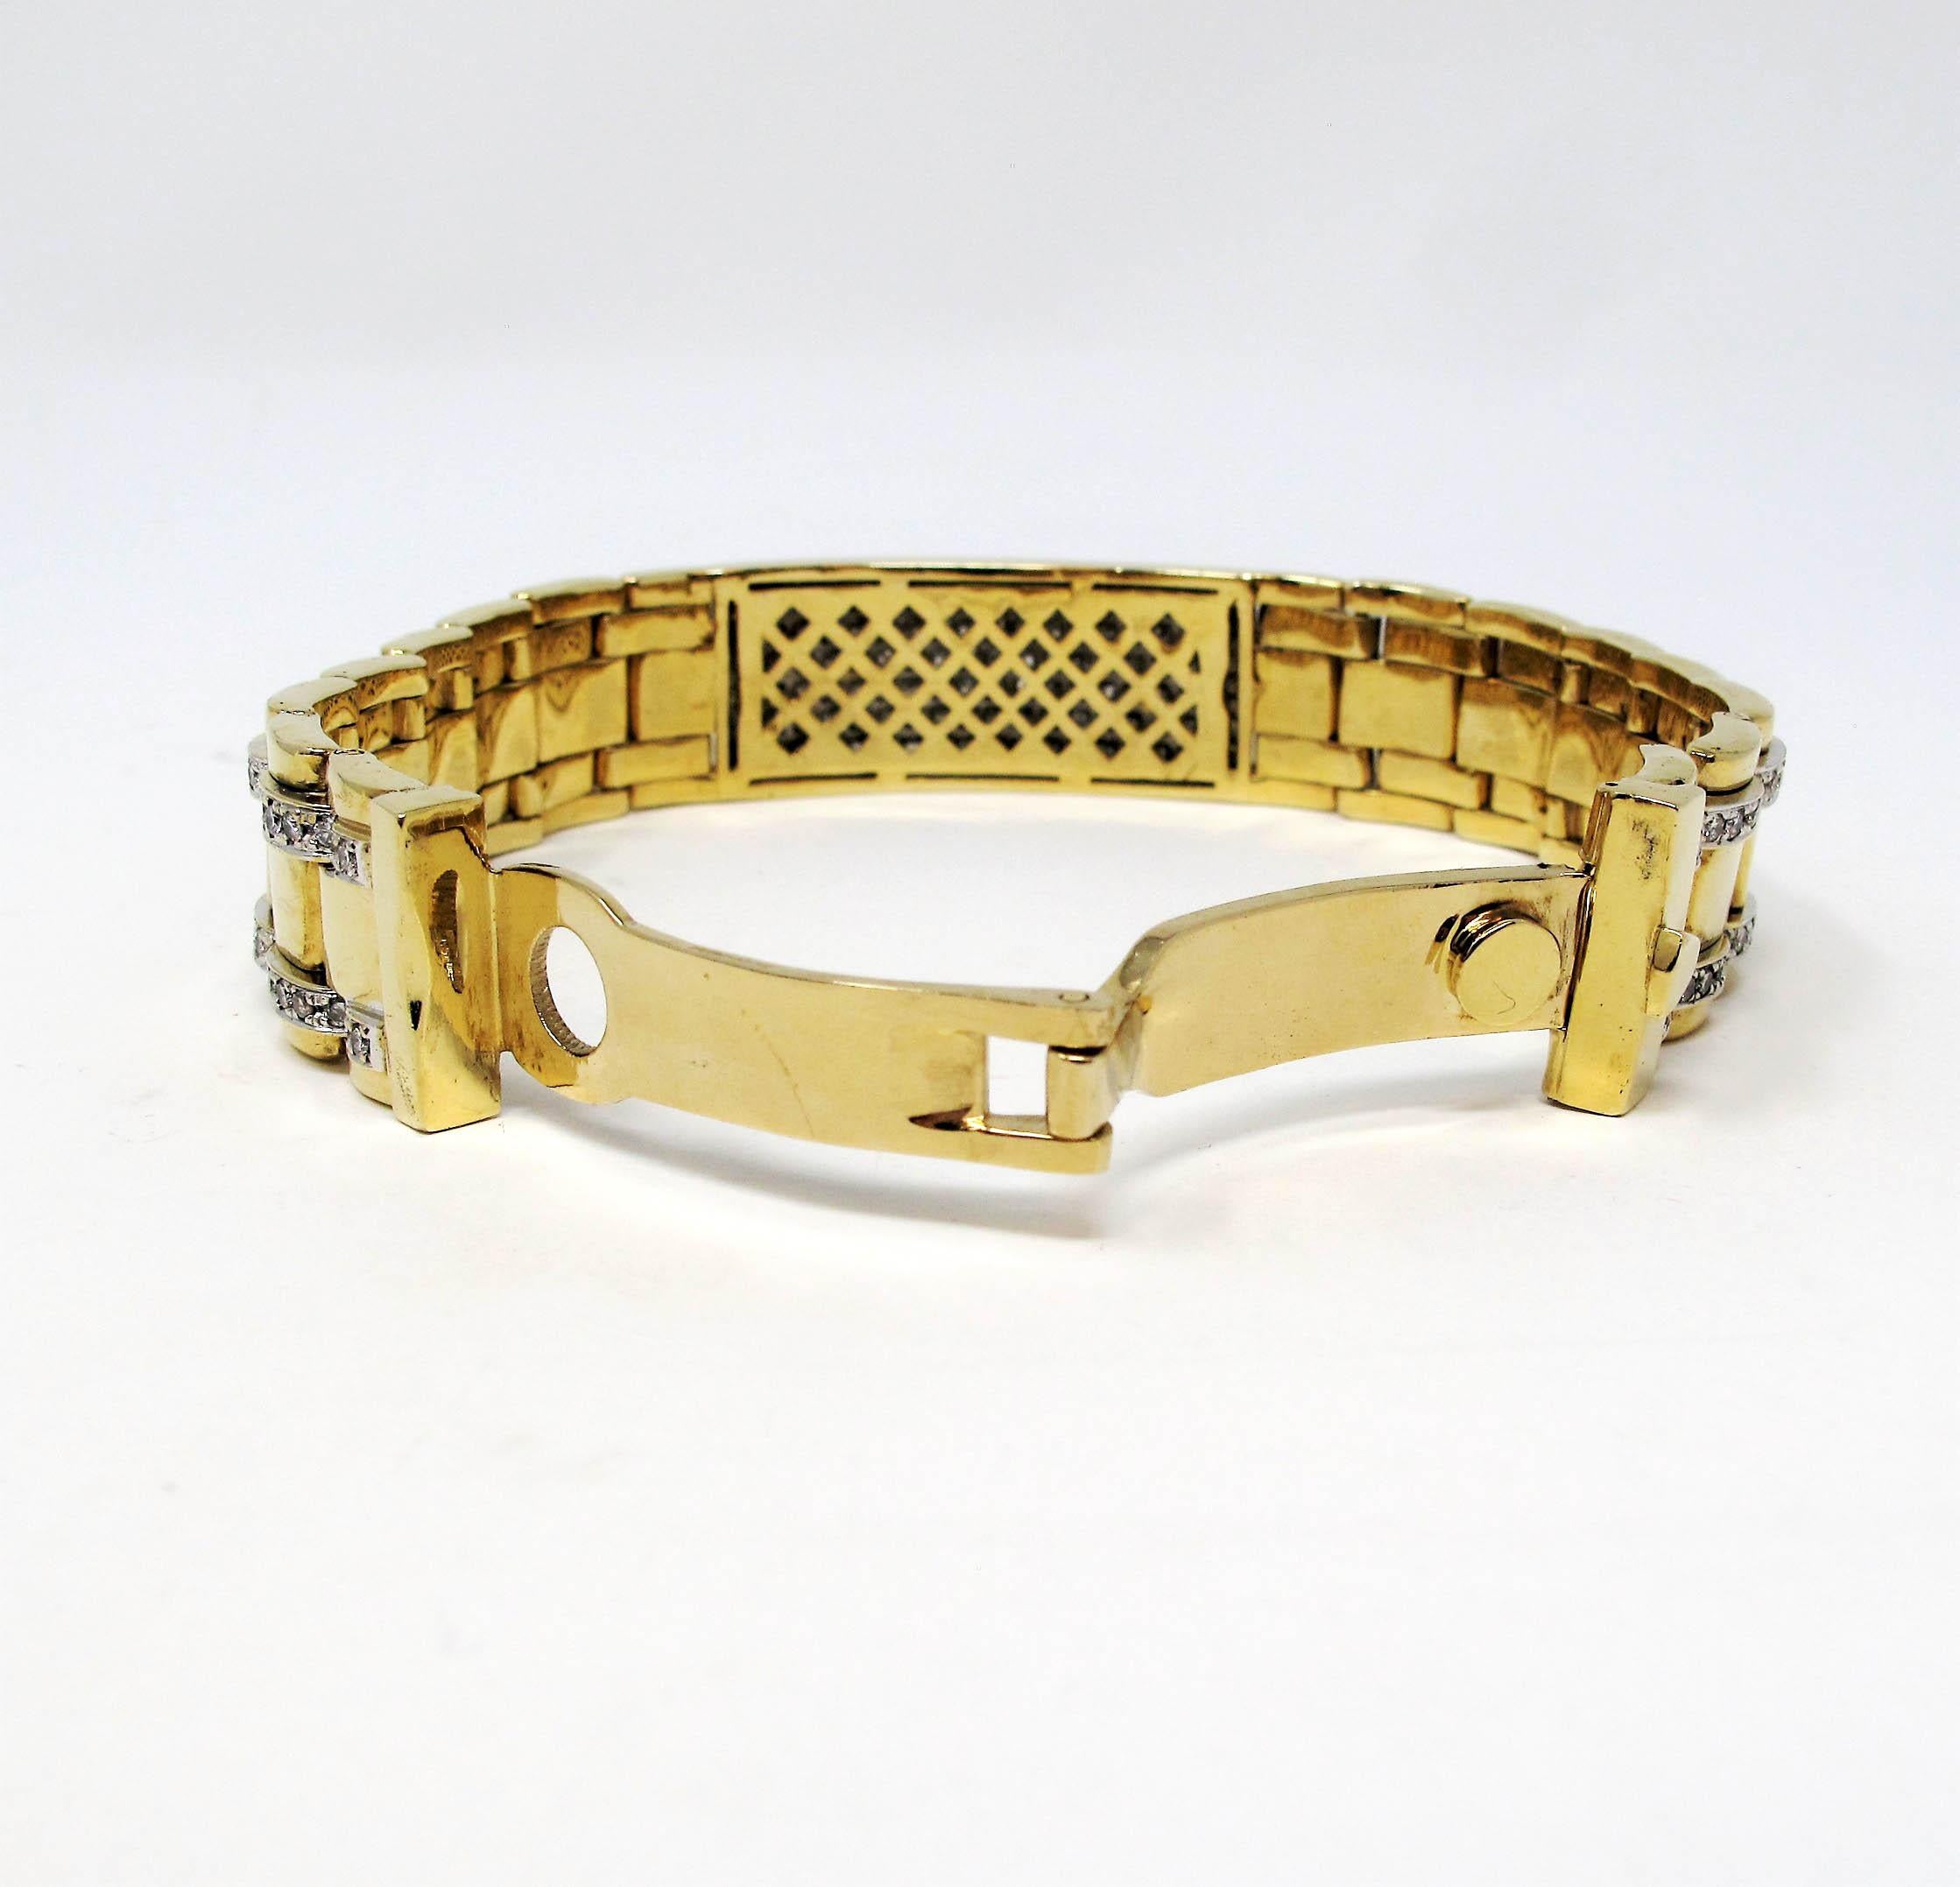 Contemporary 13.24 Carats Total Weight Princess Cut Diamond ID Link Bracelet in 14 Karat Gold For Sale